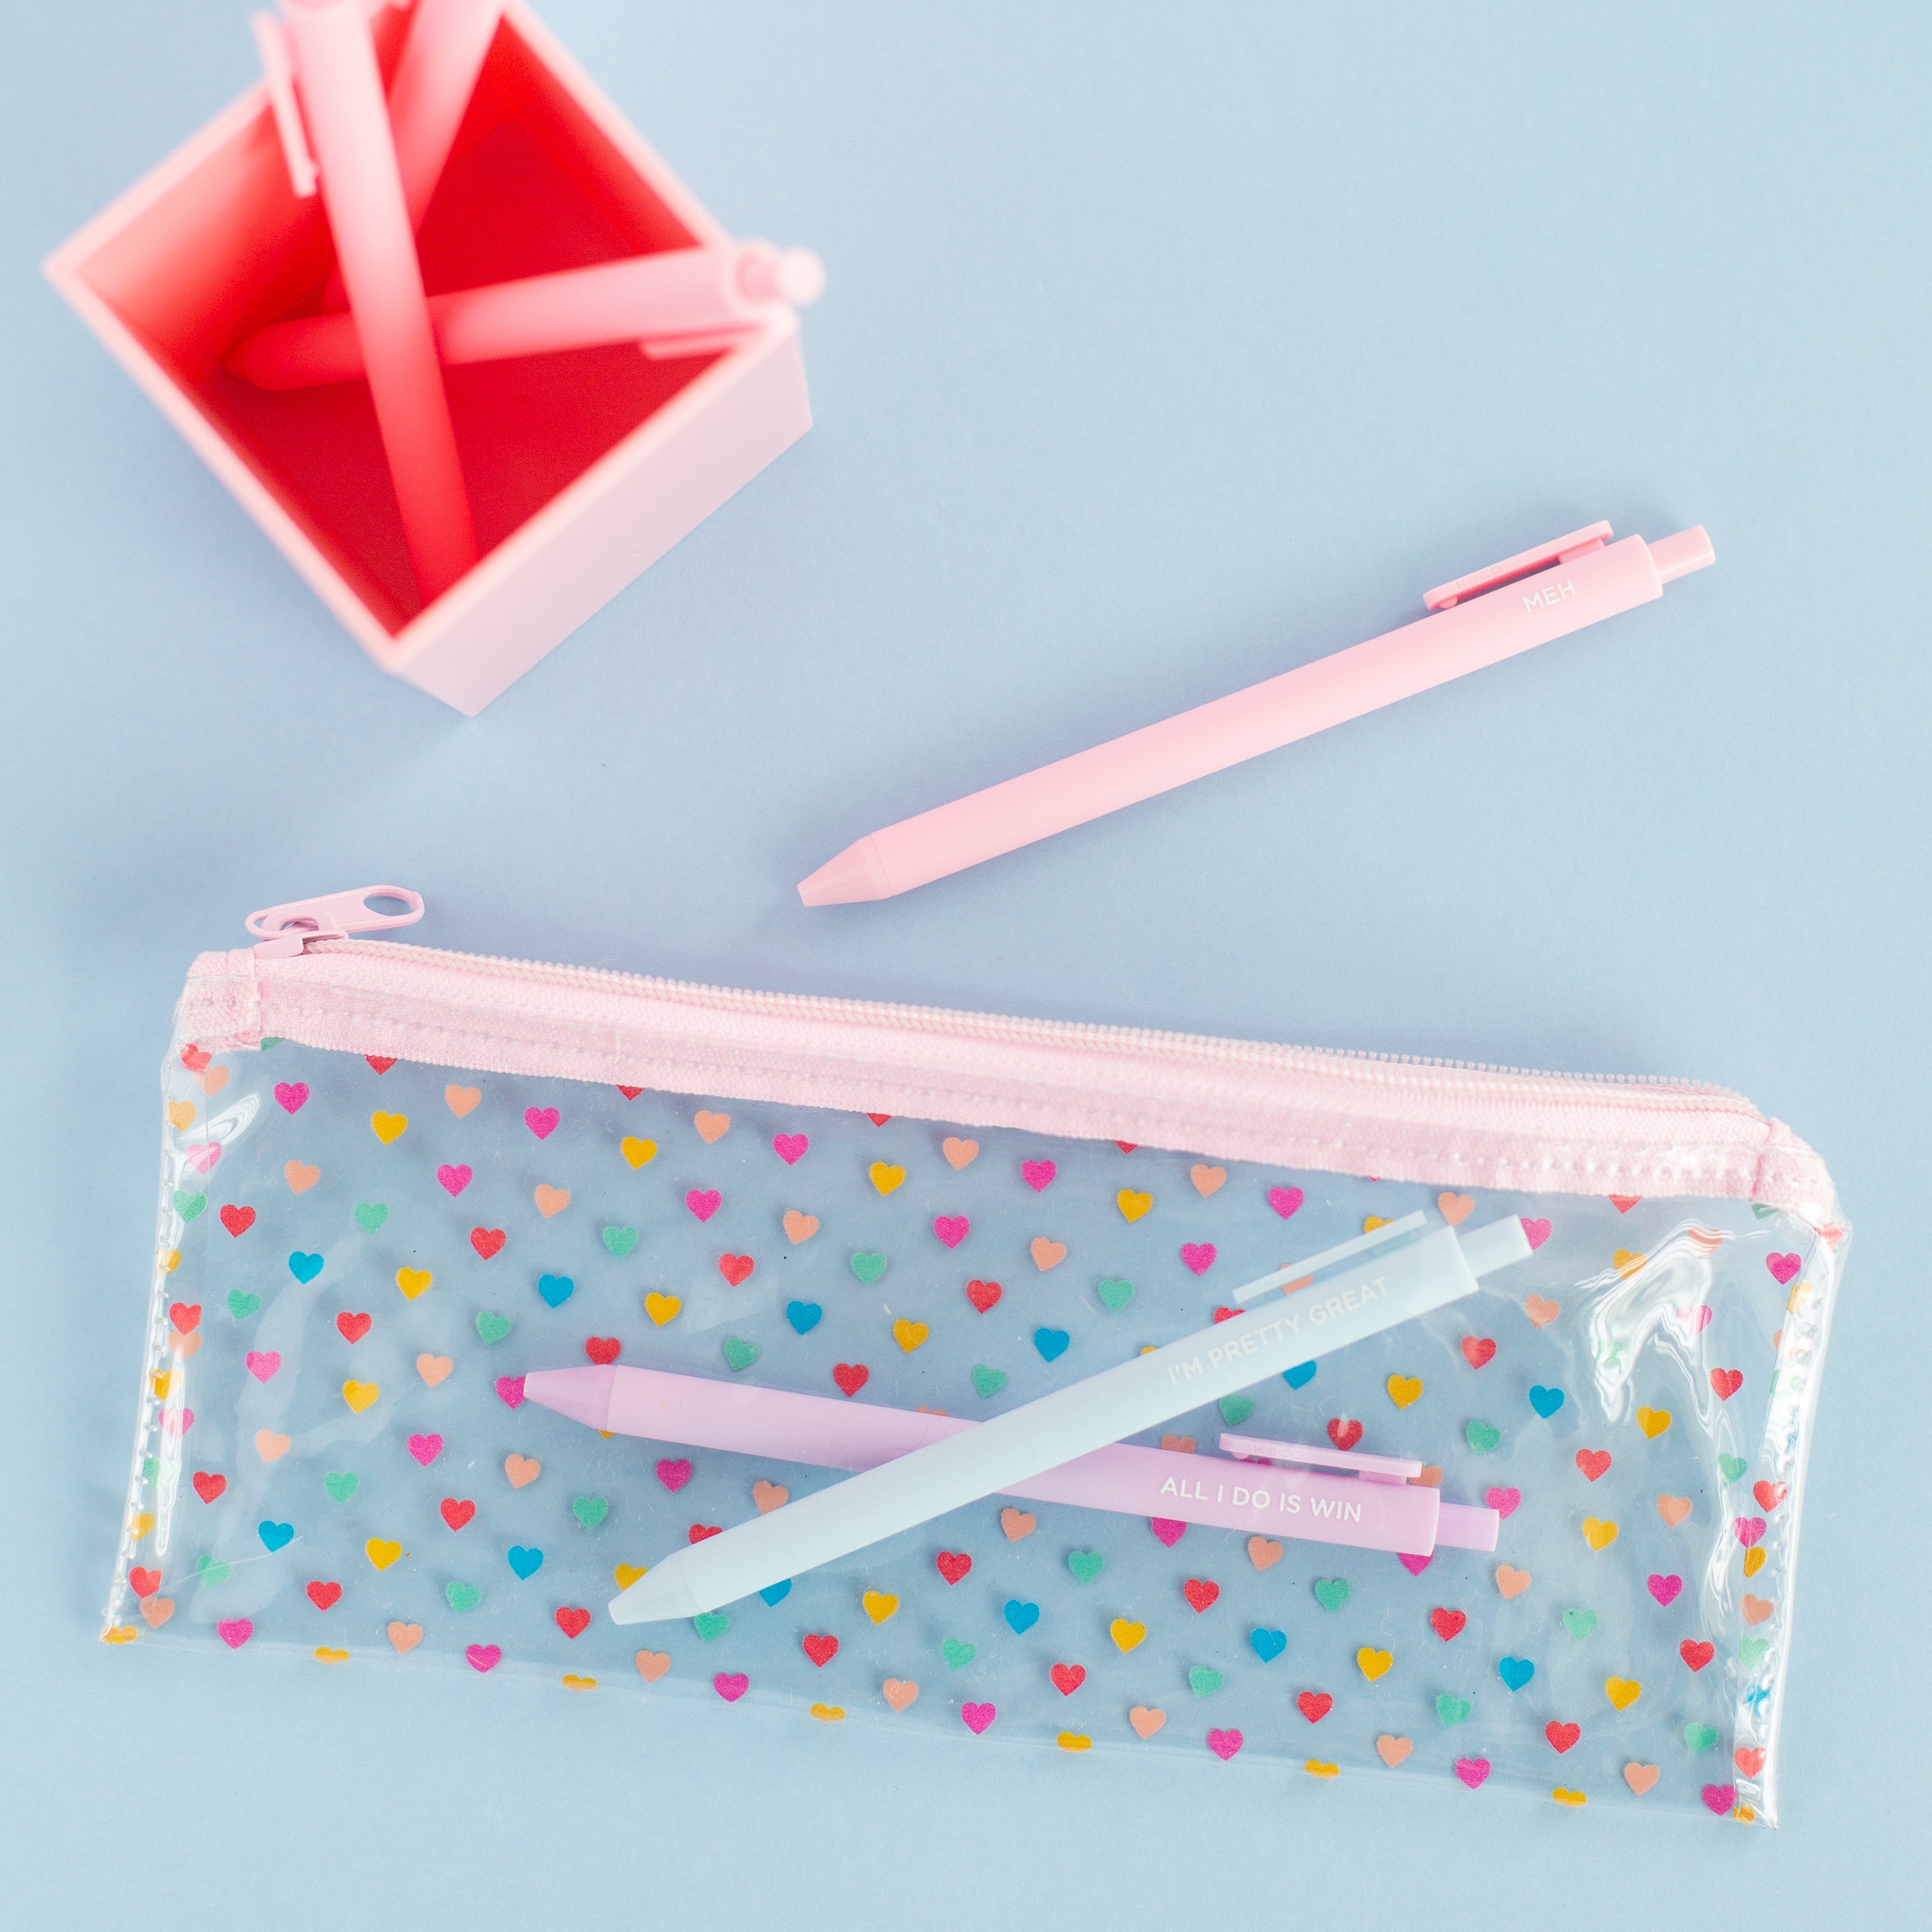 The Container Store Tiny Hearts Vinyl Pencil Pouch - Each